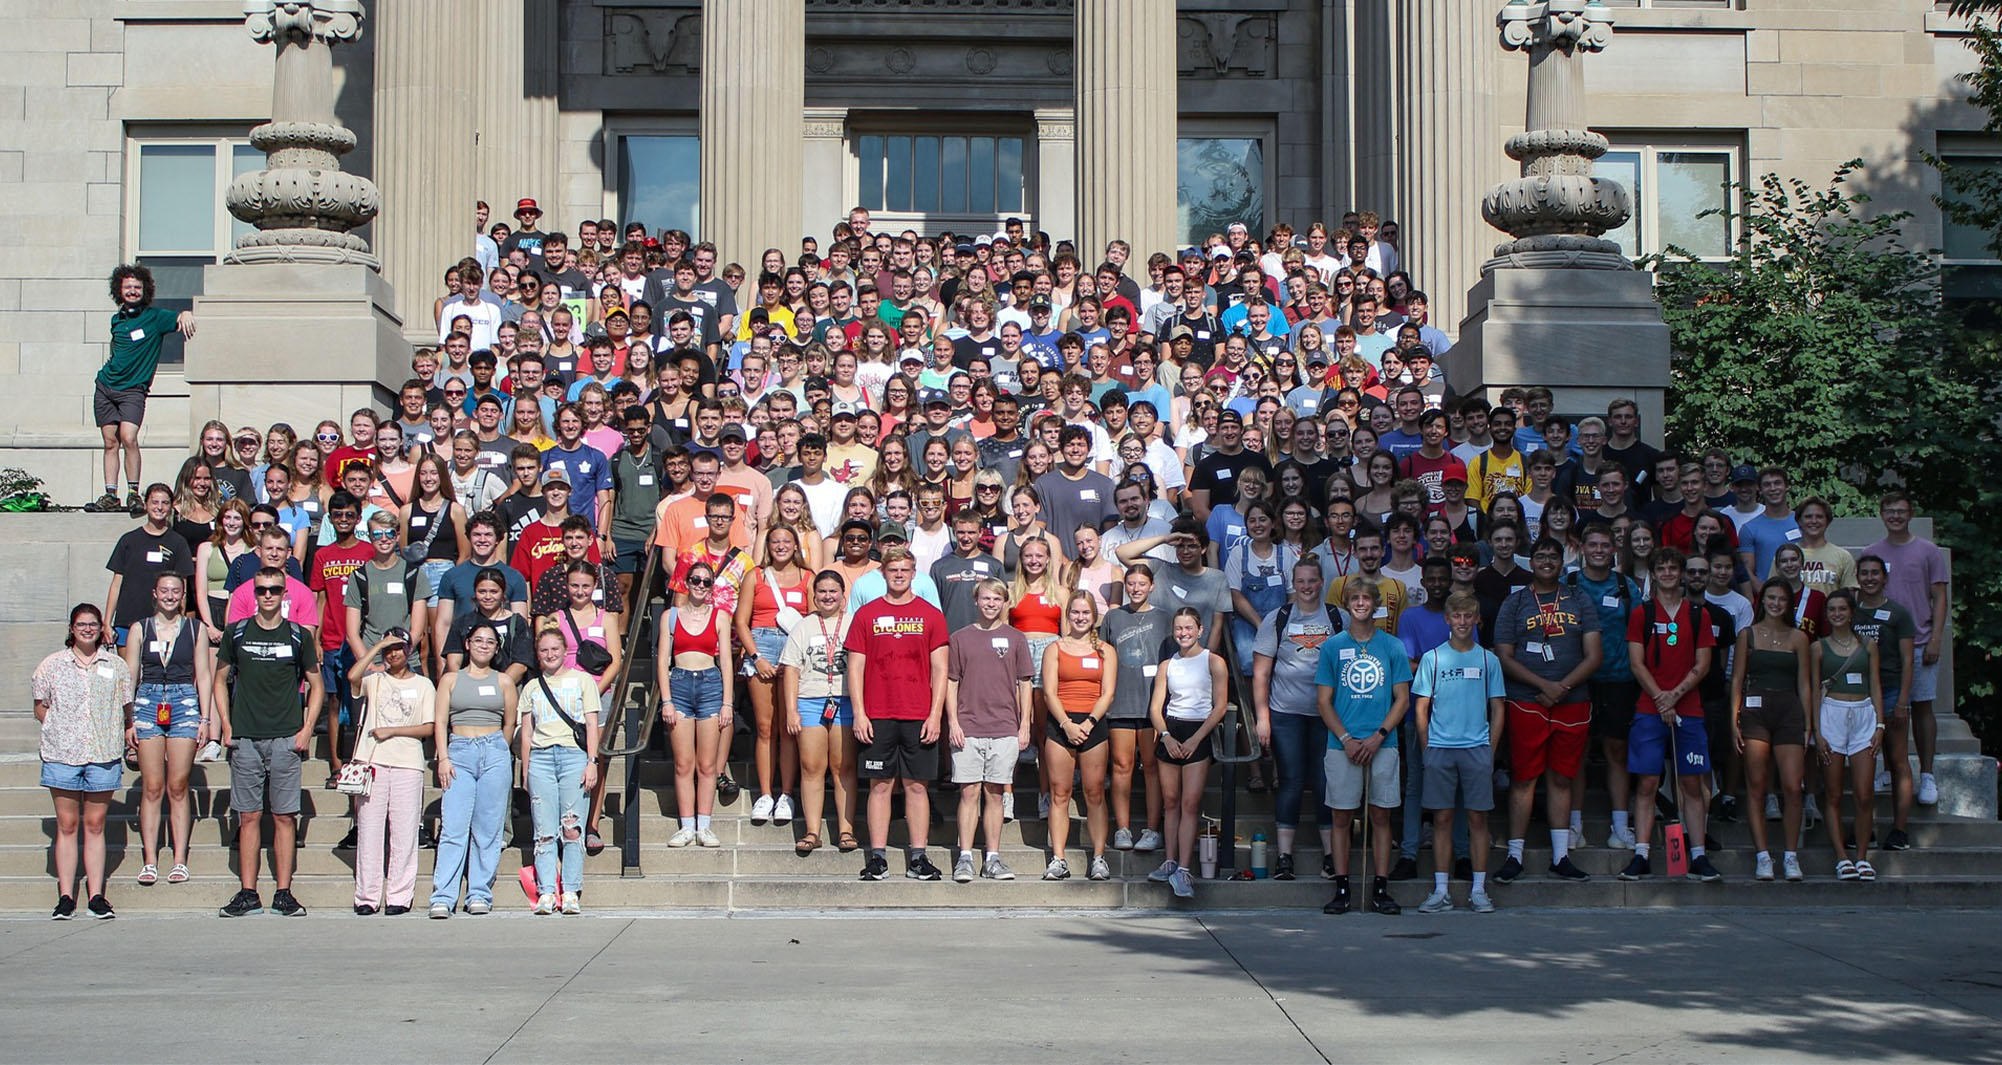 Group photo of honors students who attended the First-Year Honors Program Kickoff, located on the steps of Beardshear Hall.